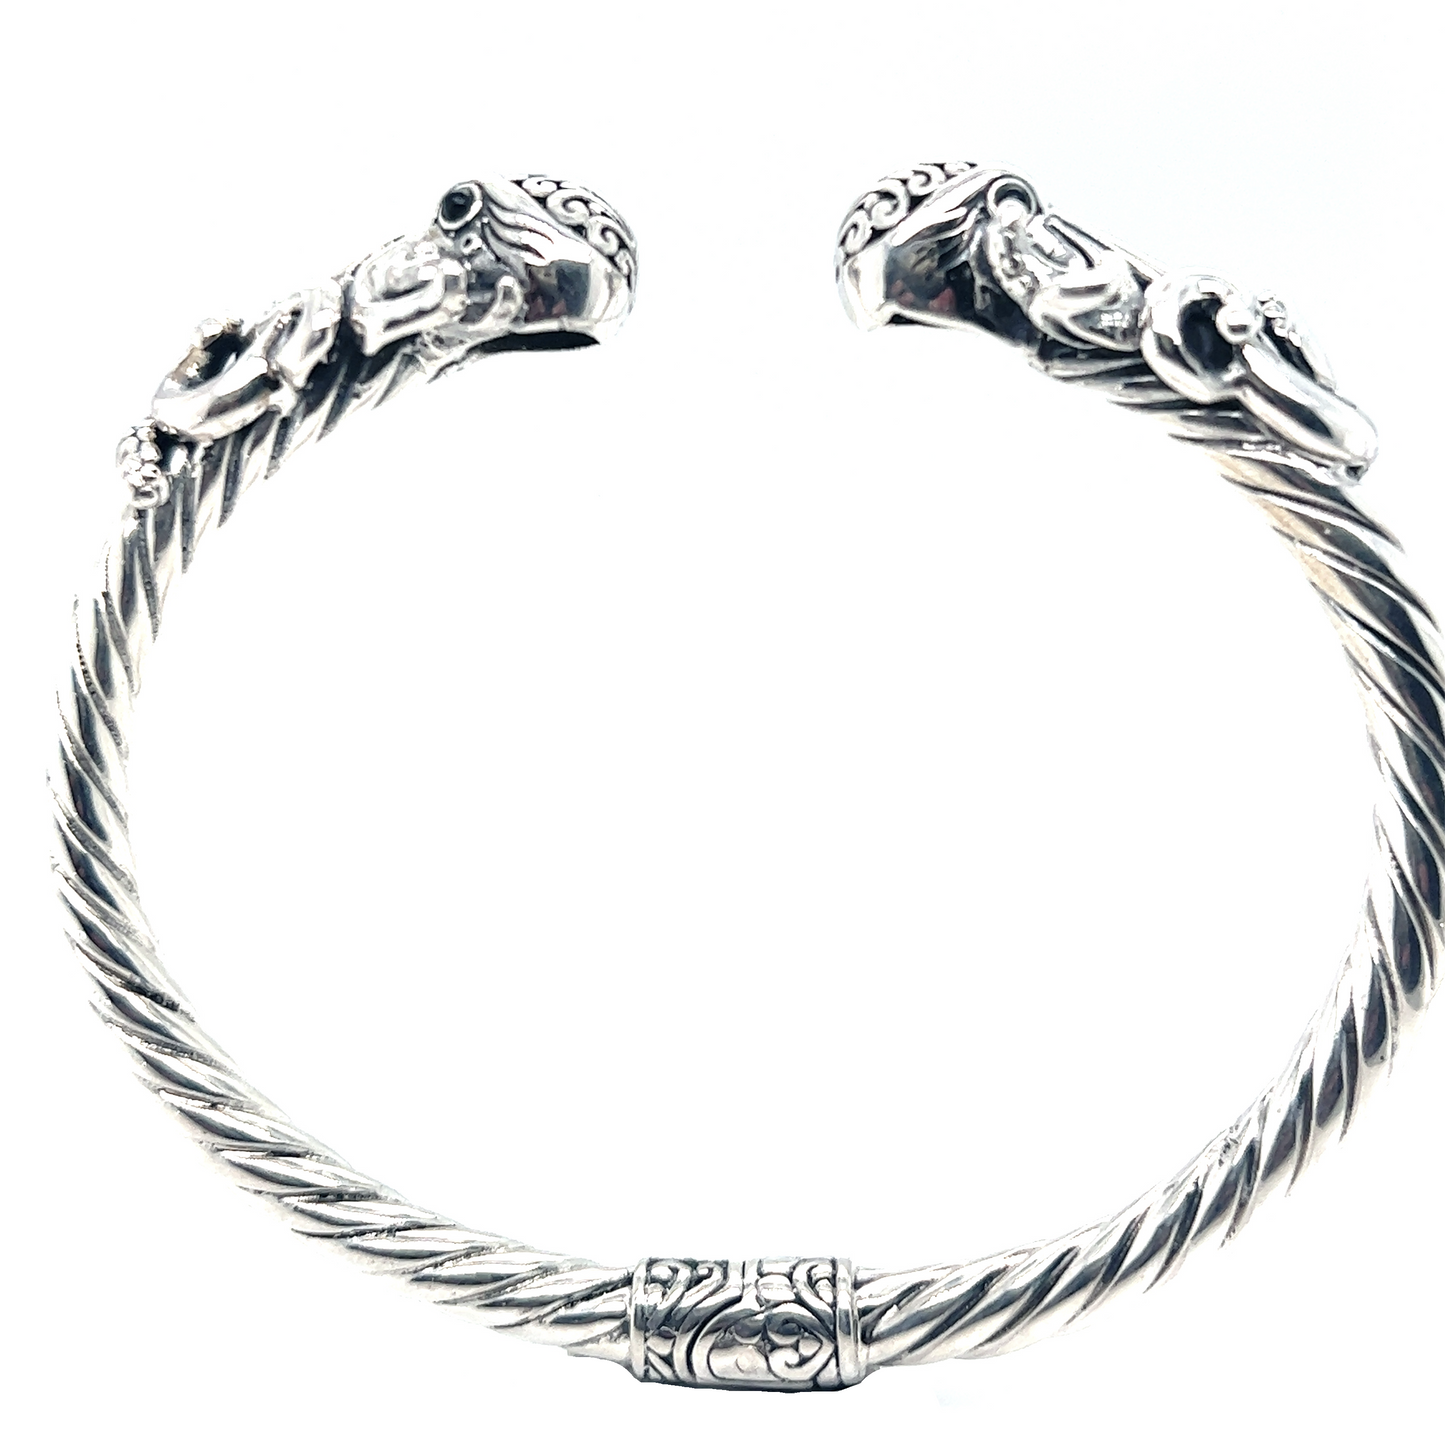 
                  
                    A Twisted Bangle Bracelet with Octopus Ends from Super Silver, a stylish piece of jewelry perfect for adding an edgy touch to any outfit.
                  
                